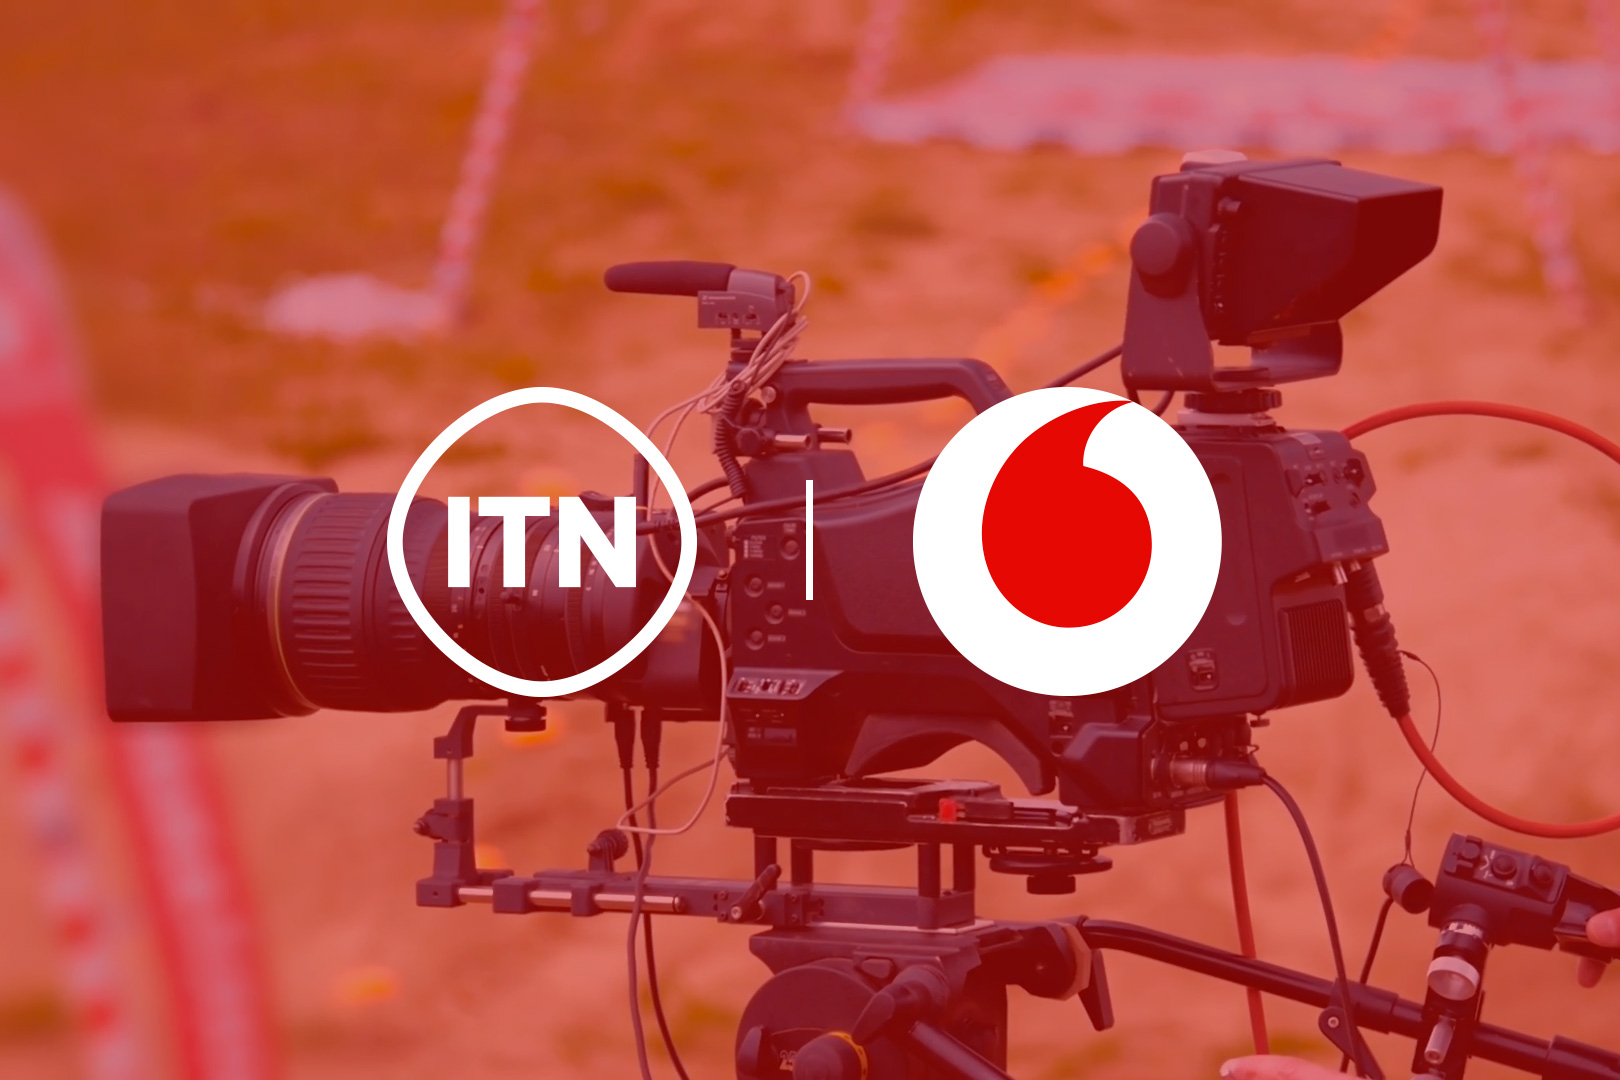 Vodafone is working with ITN to broadcast the Coronation of King Charles III.